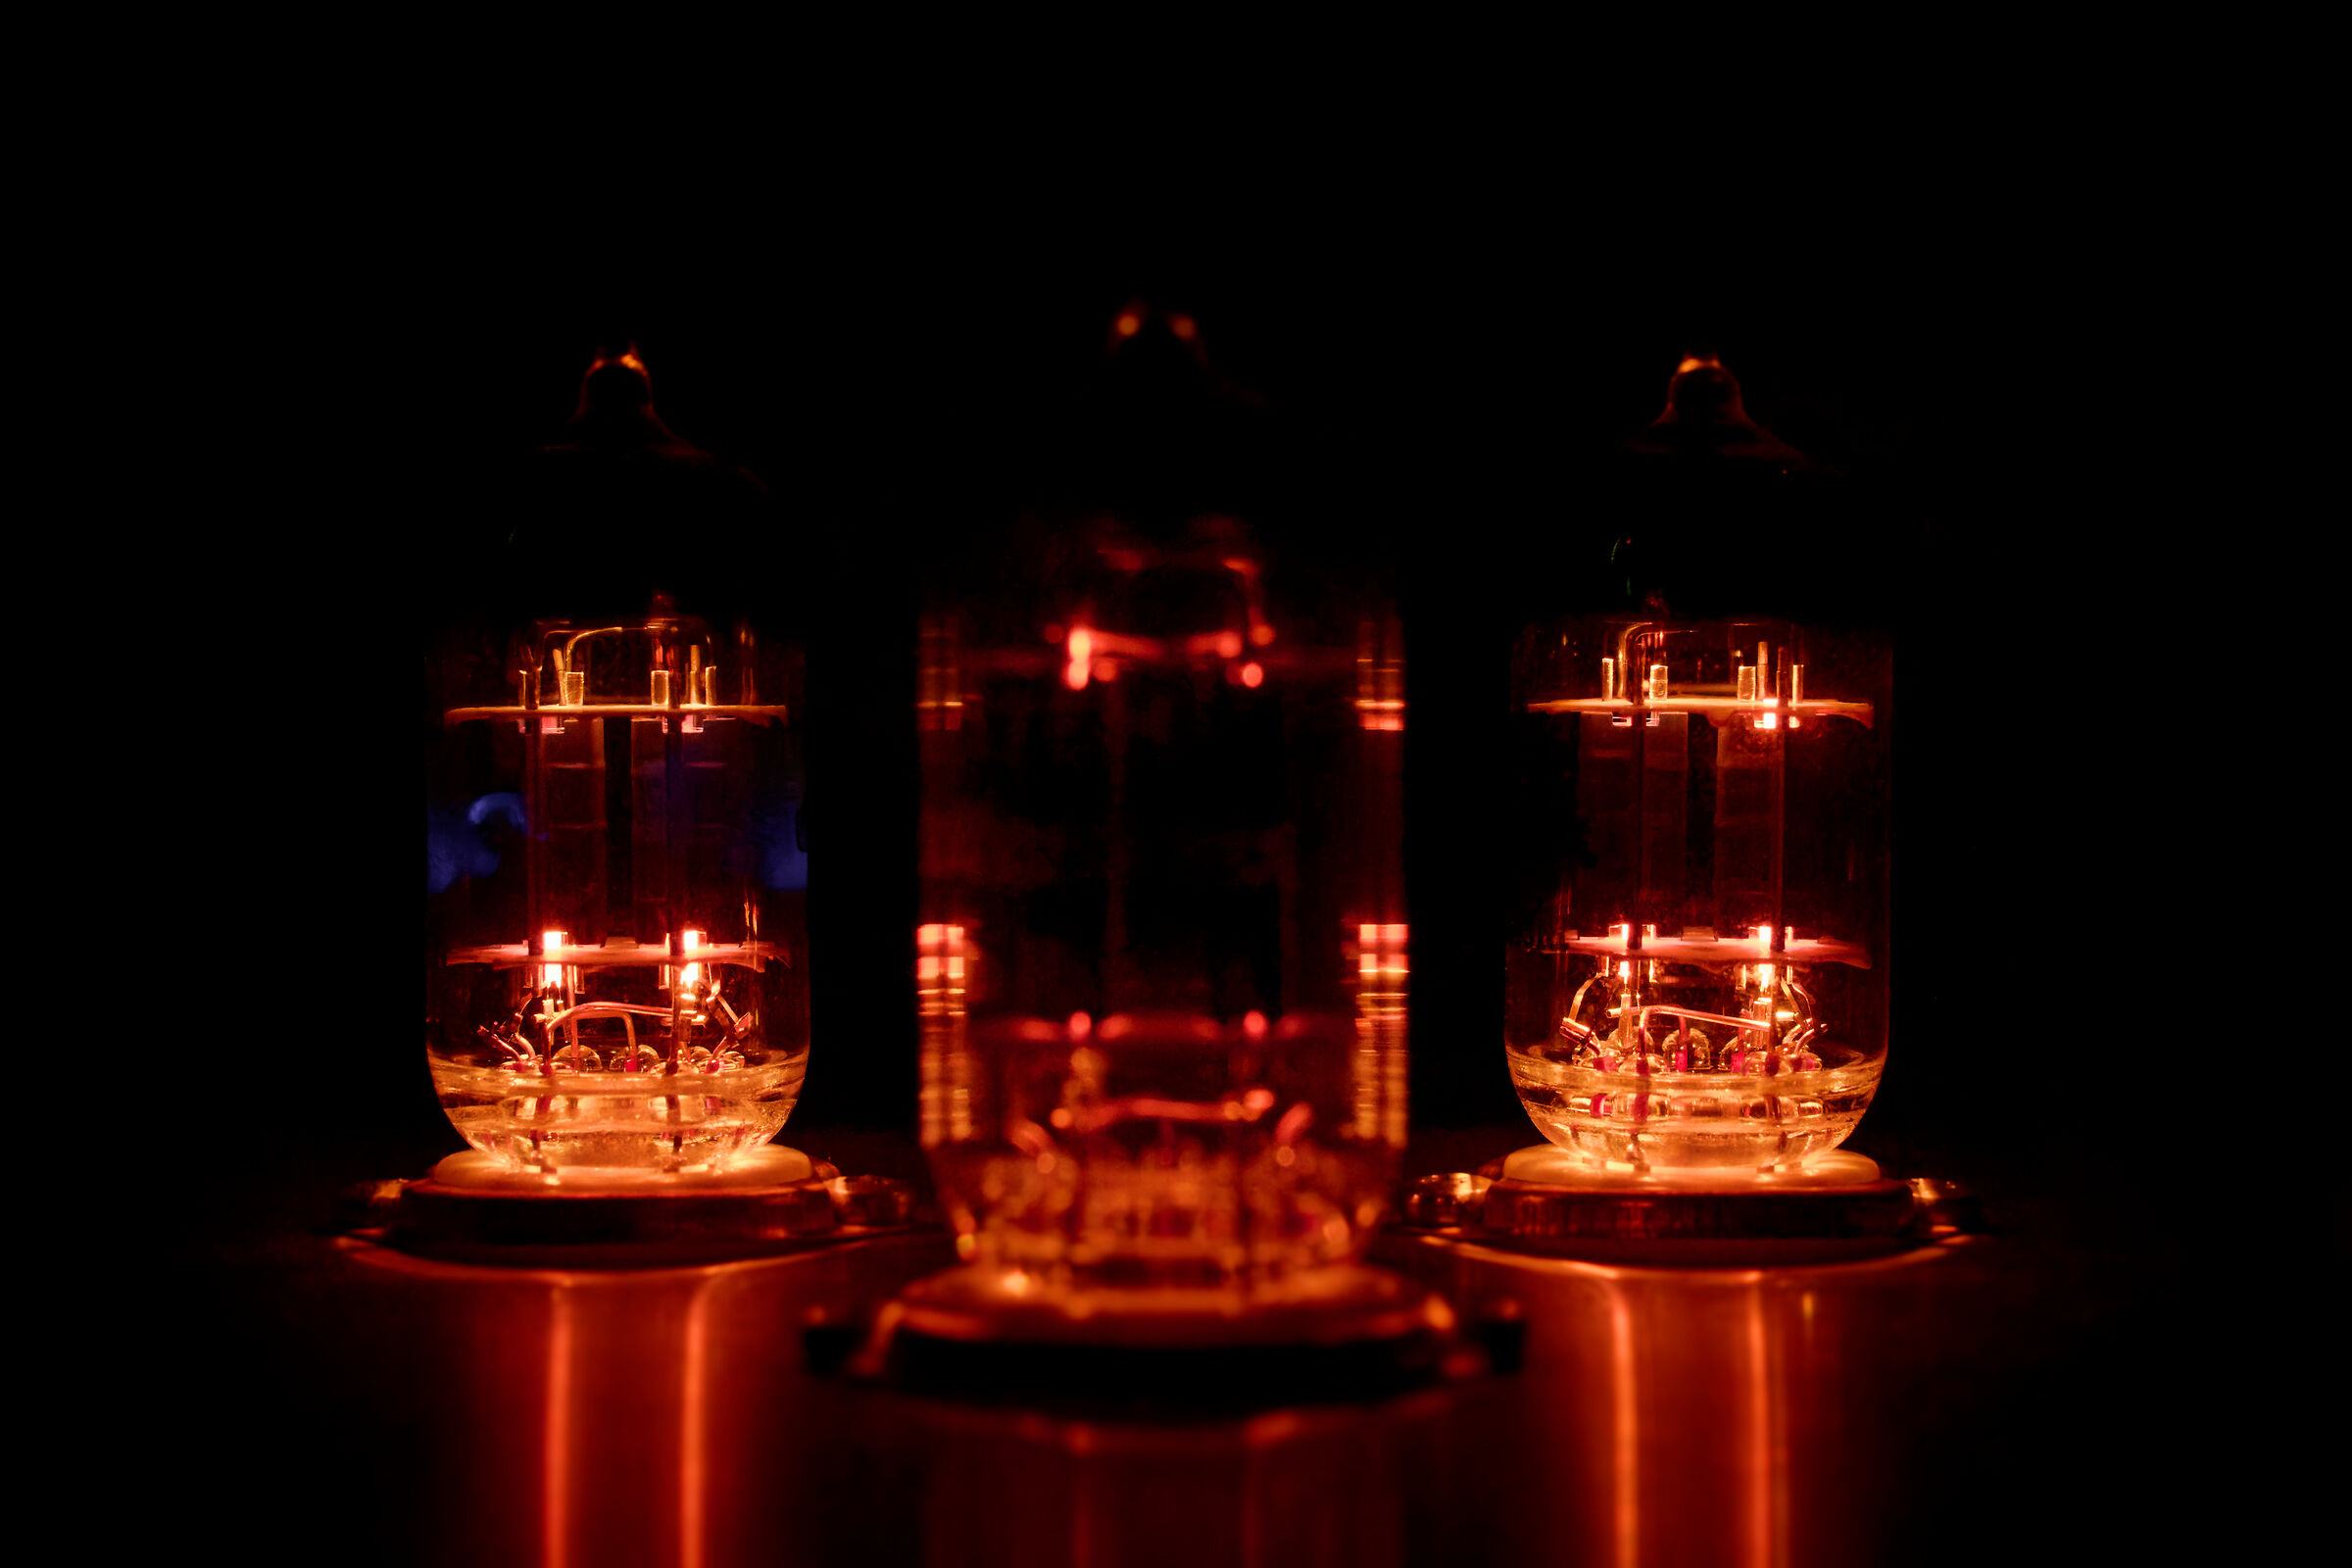 Thermionic reflections...